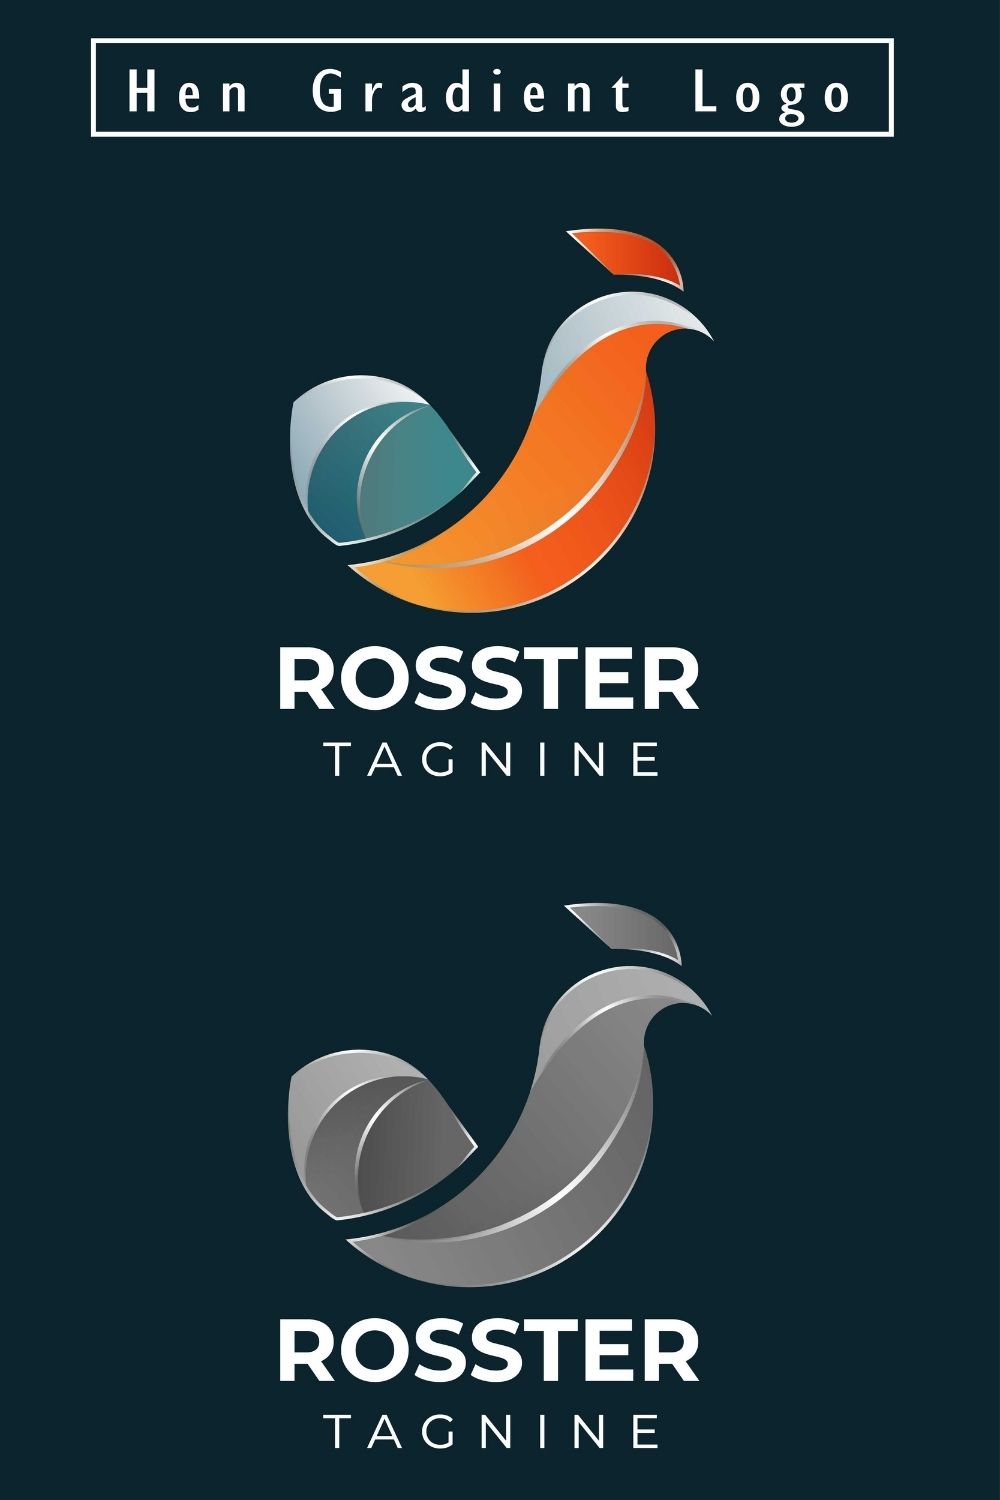 Chicken Gradient Colorful Style Rooster logo Design For Your Brand.